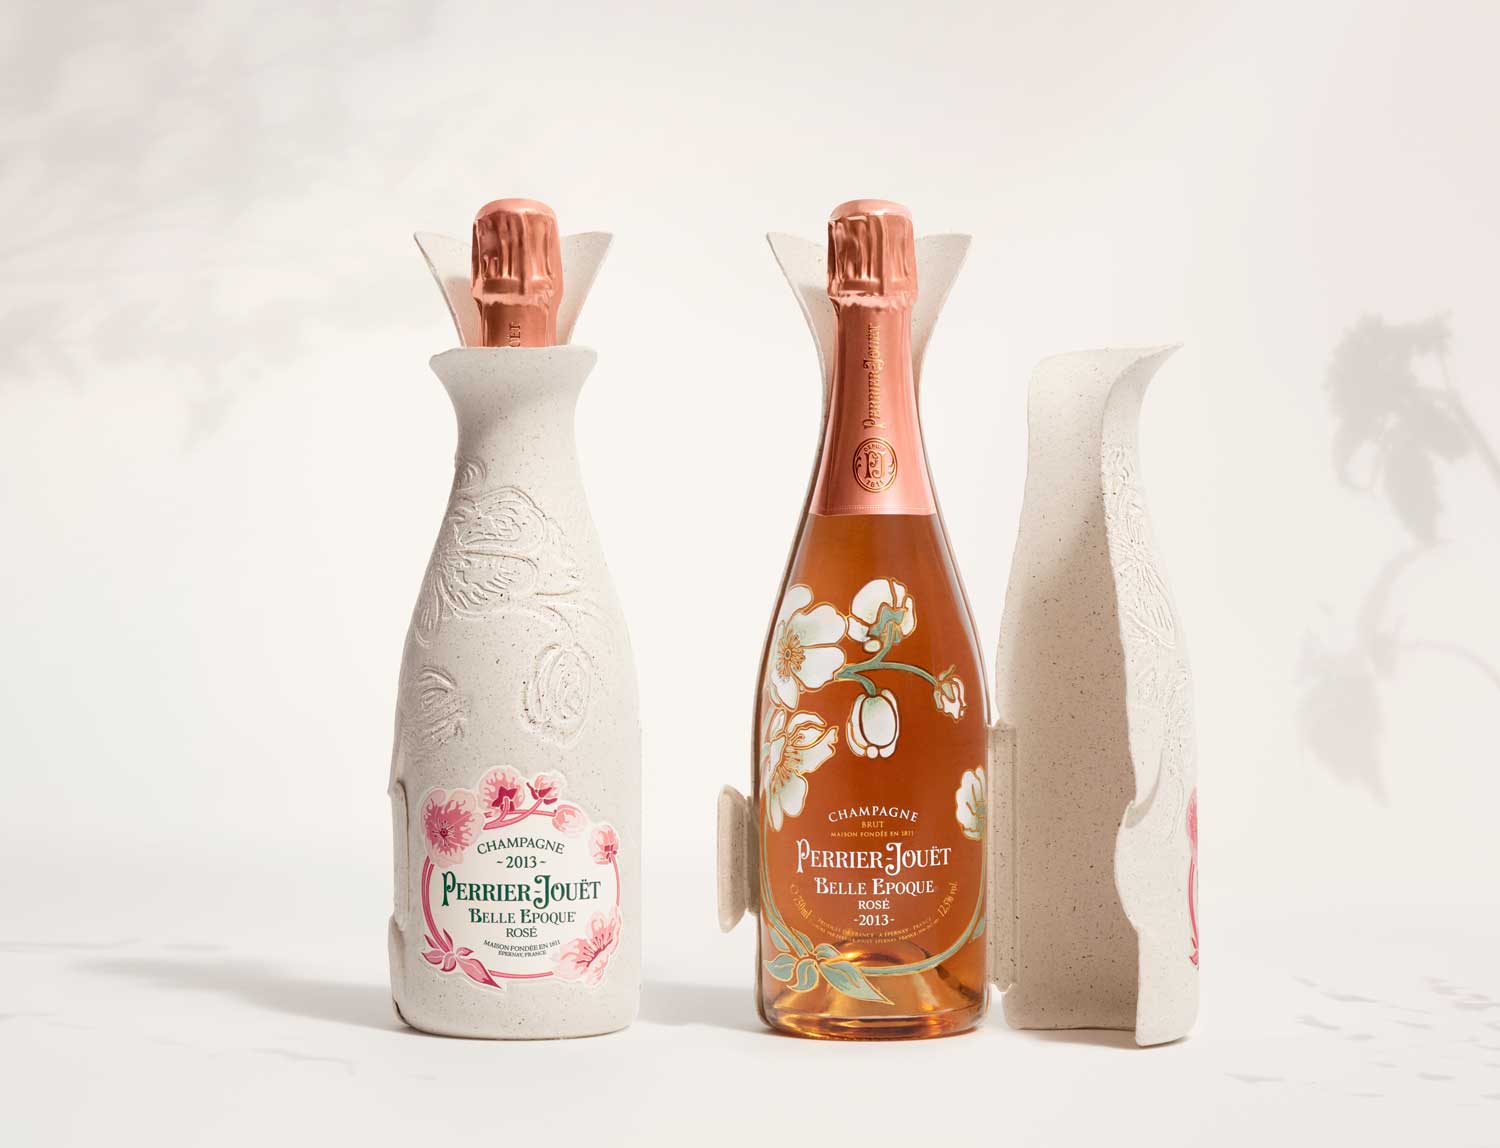 2015 Perrier Jouet 'Belle Epoque' Champagne with Gift Set Pre-Arrival